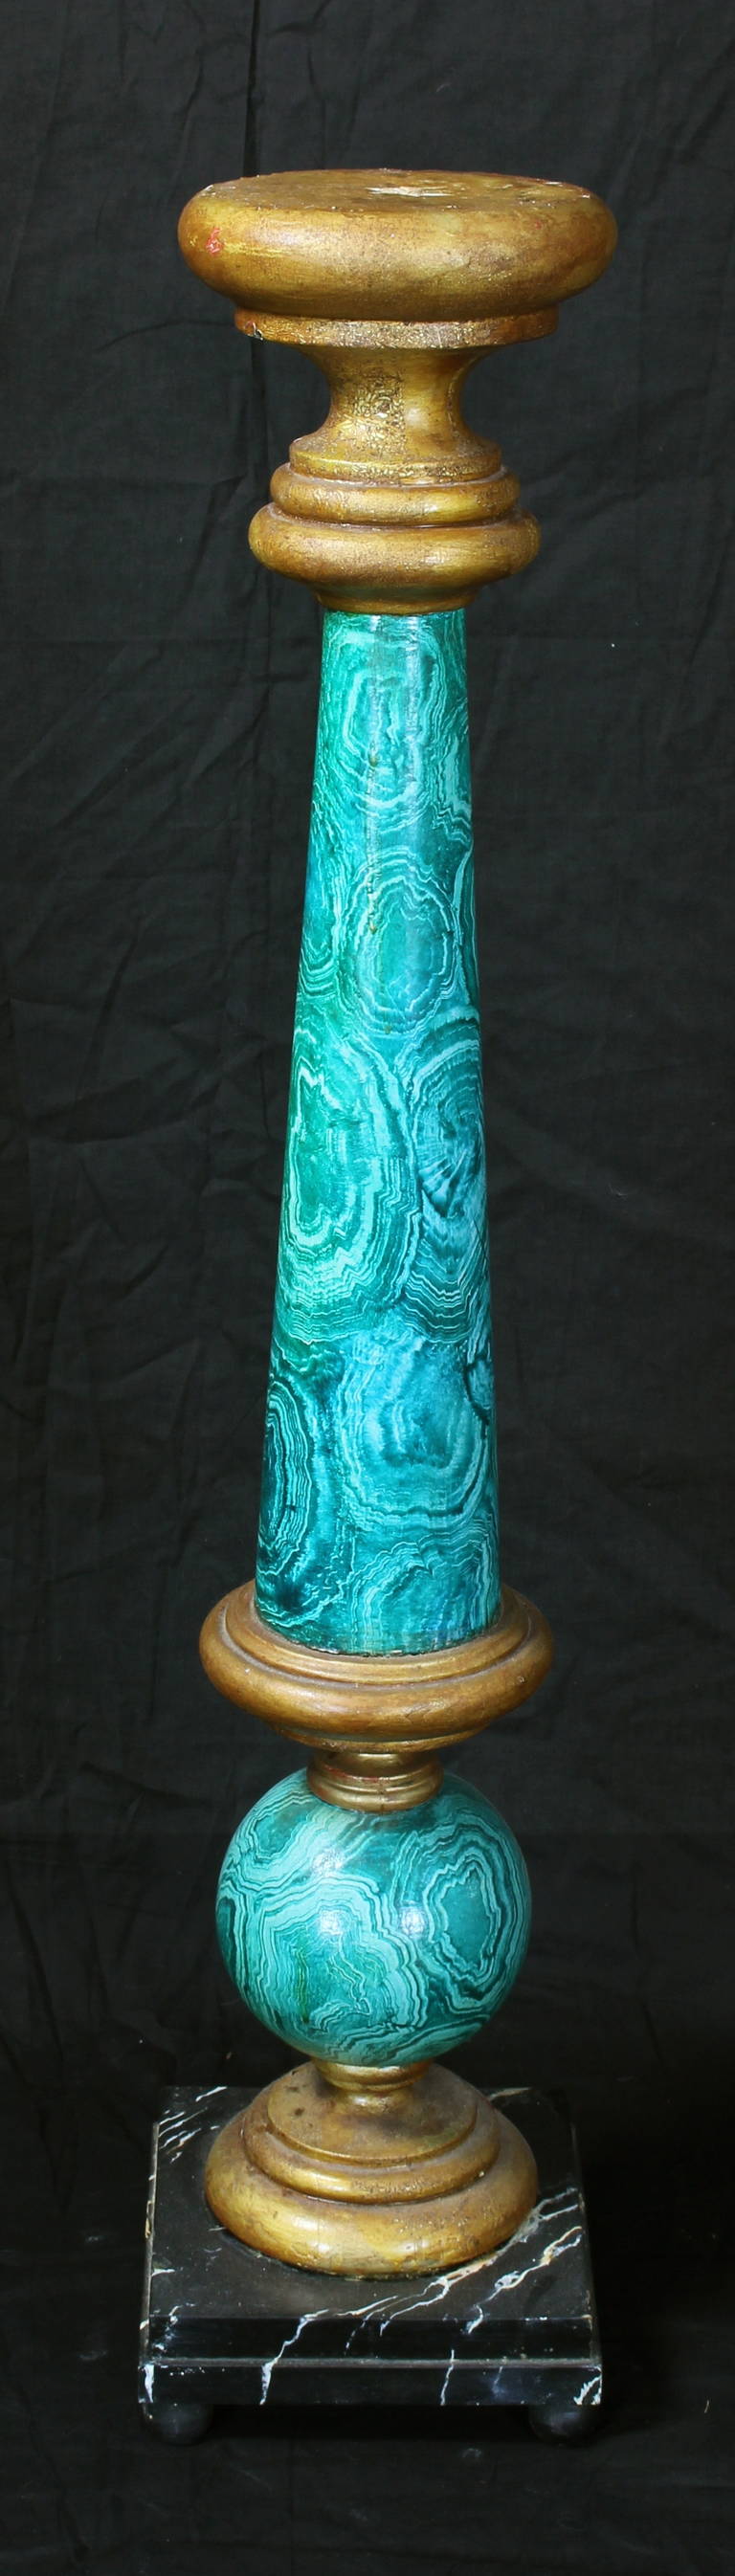 A large and very decorative painted pedestal with faux malachite and gilt decorated column on faux marble base.